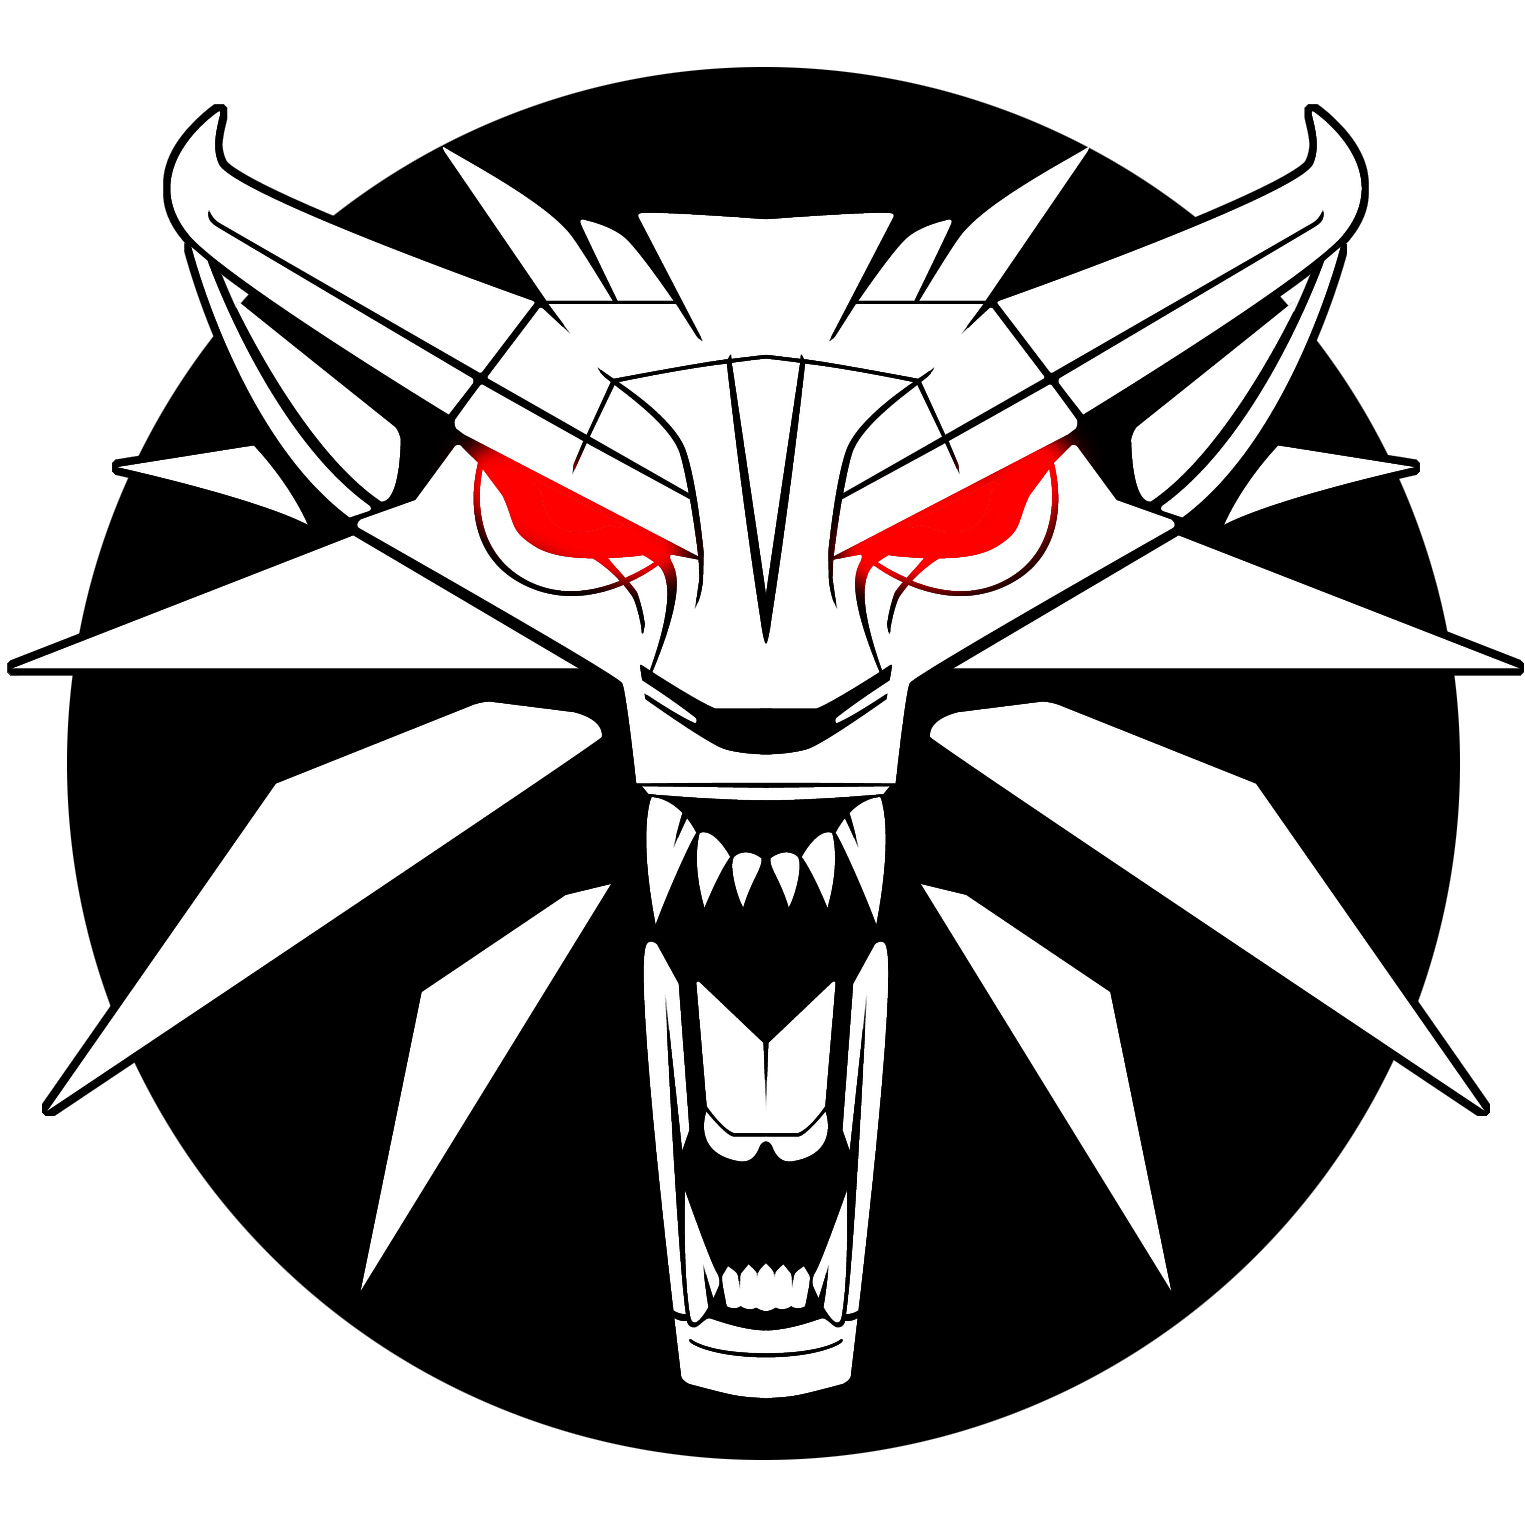 Witcher Logo - The Witcher Logo PNG Image - PurePNG | Free transparent CC0 PNG ...